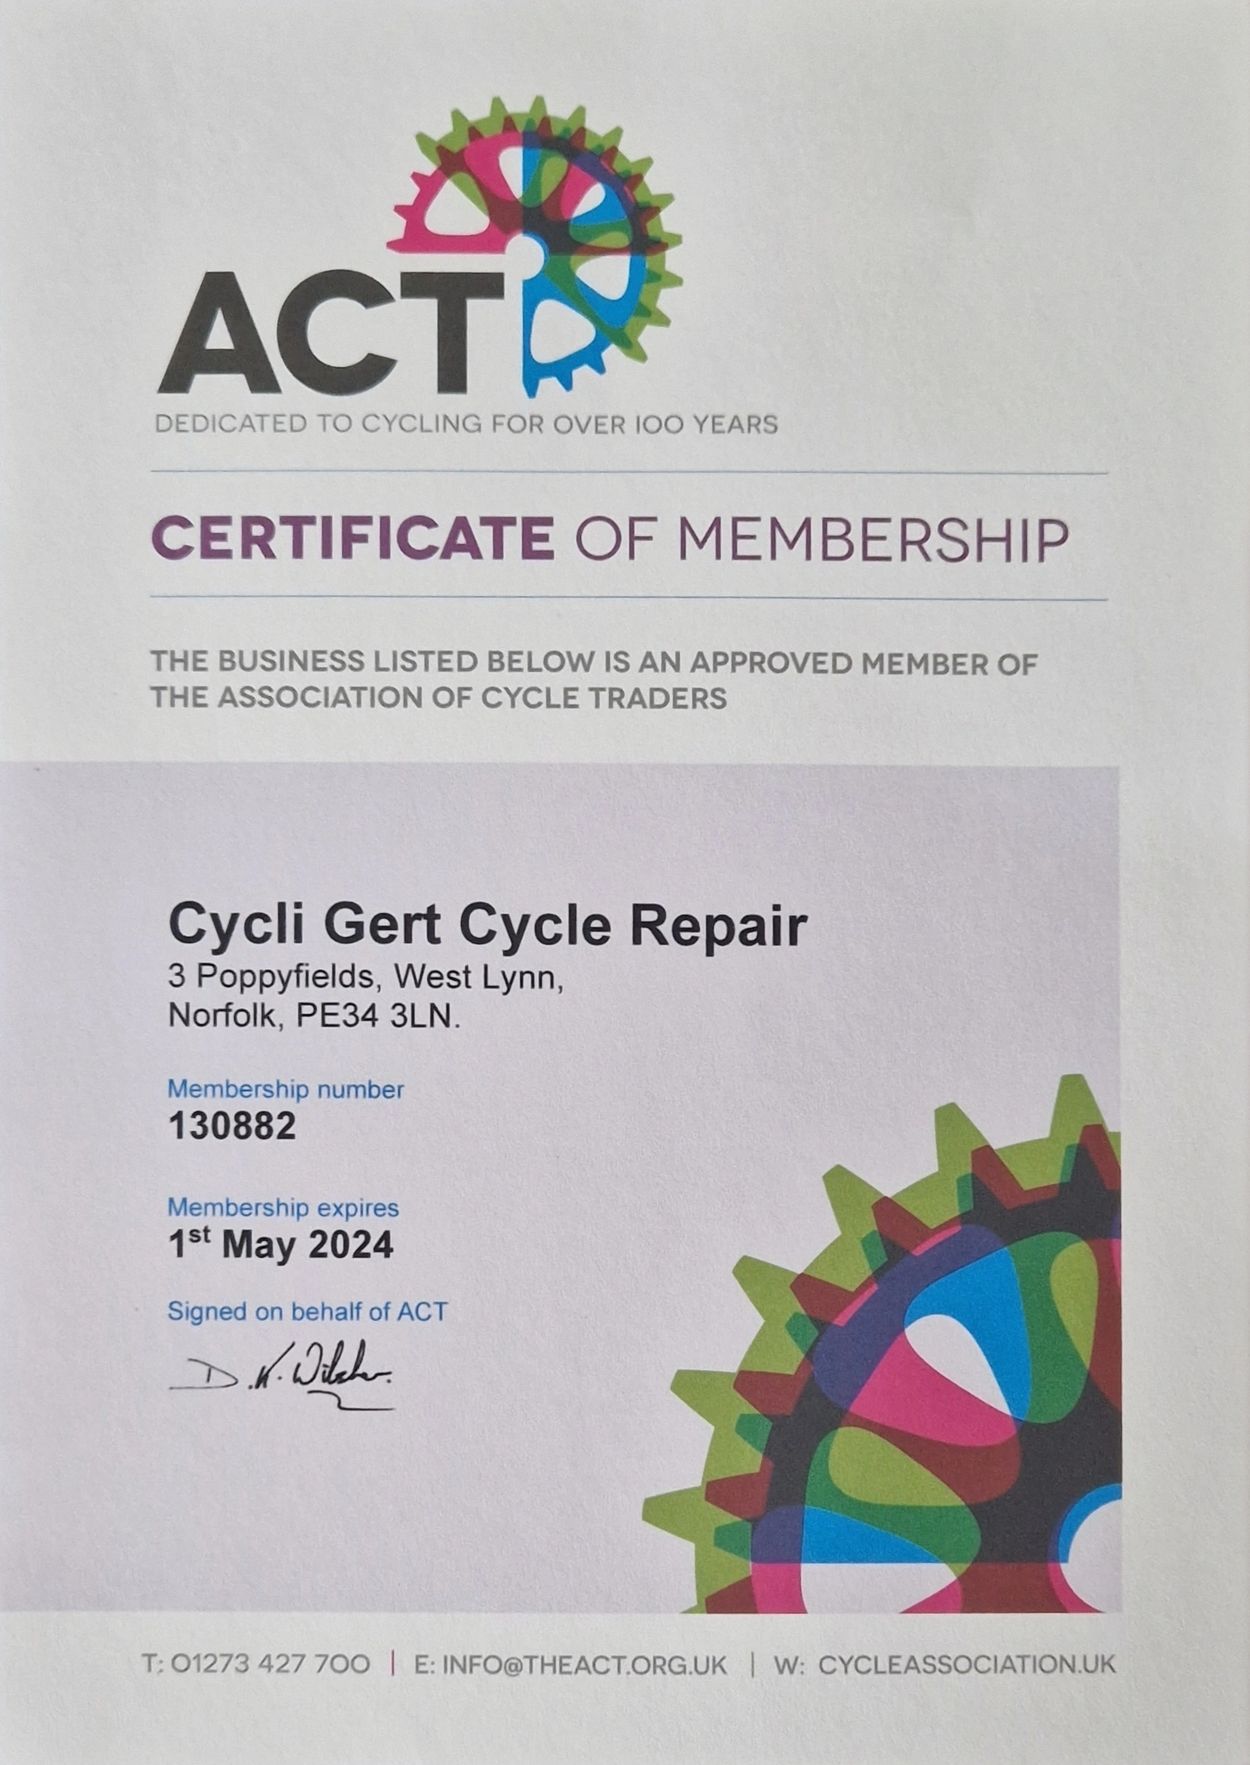 Membership of the Association of Cycle Traders